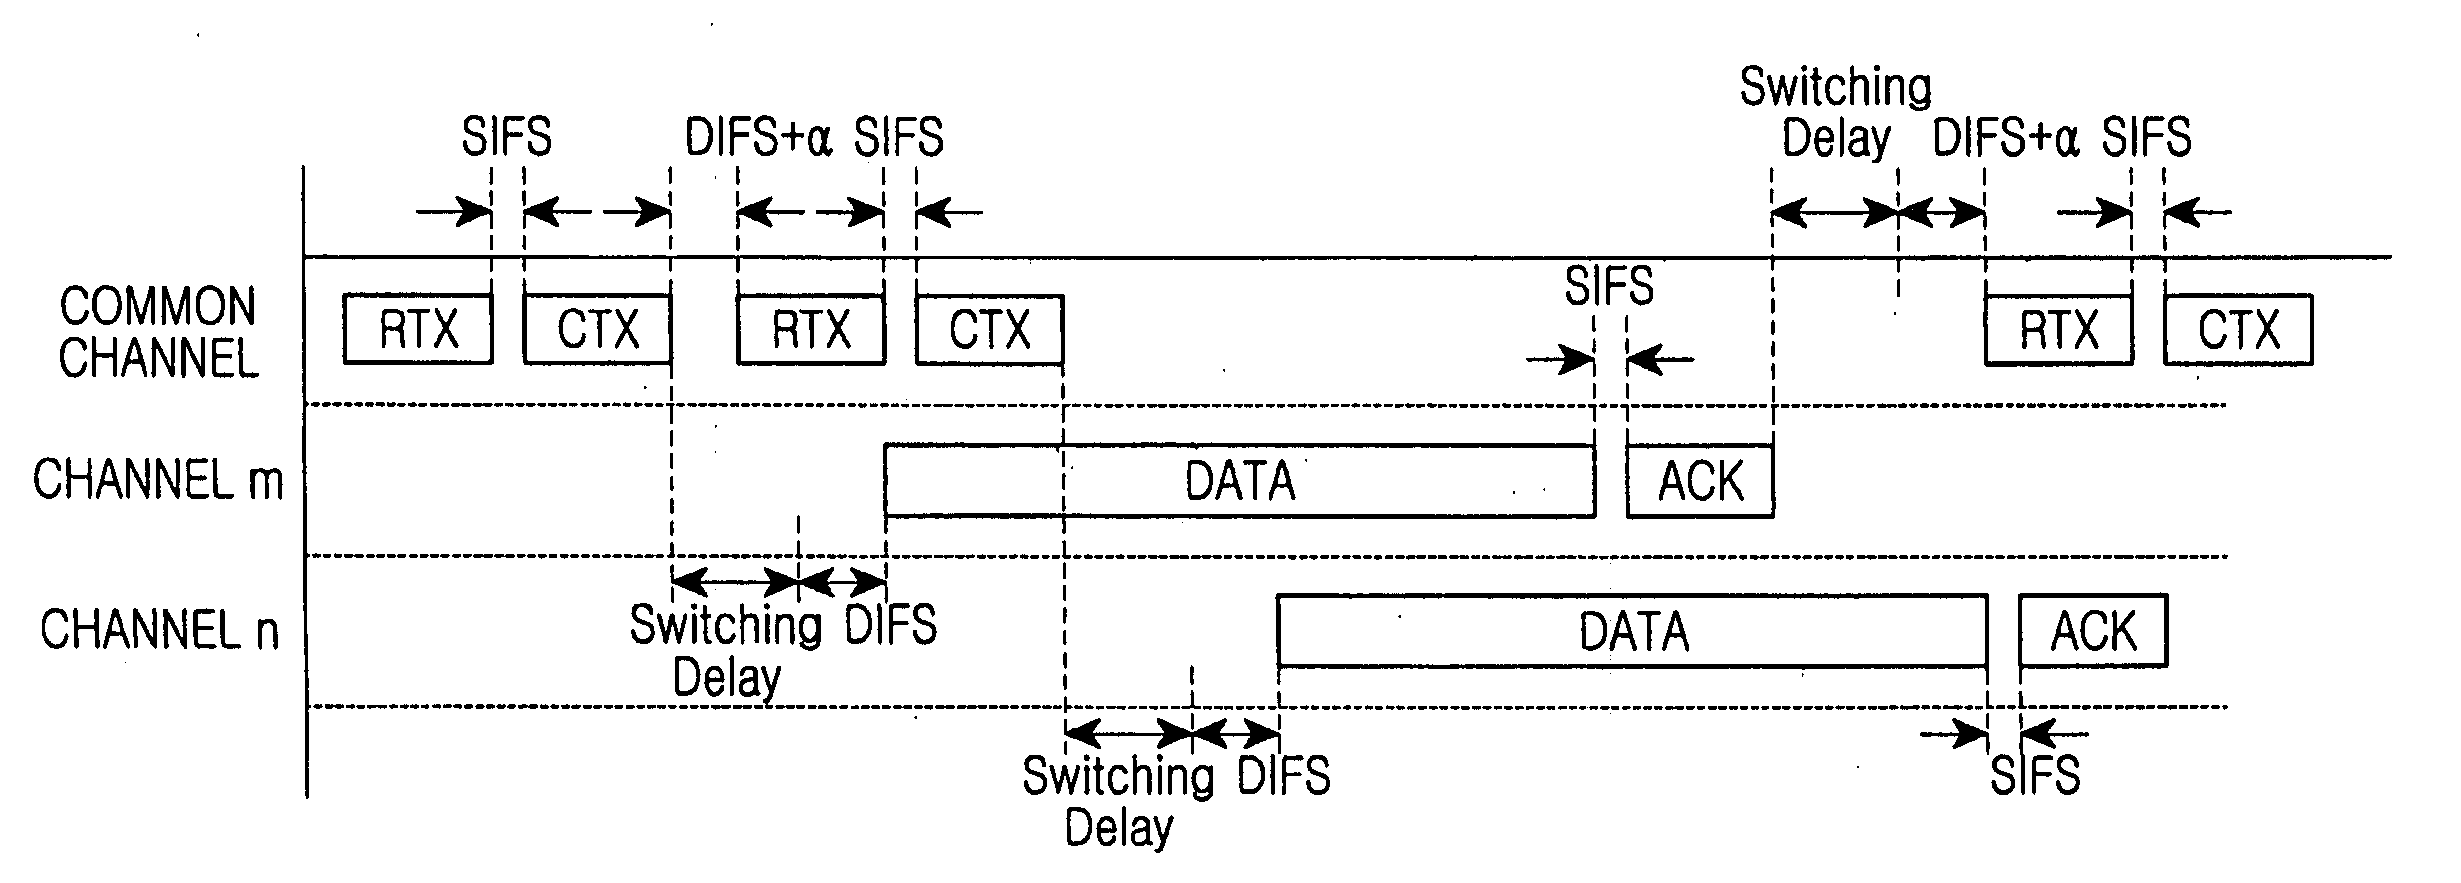 Multi-channel scheduling method for WLAN devices with a single radio interface